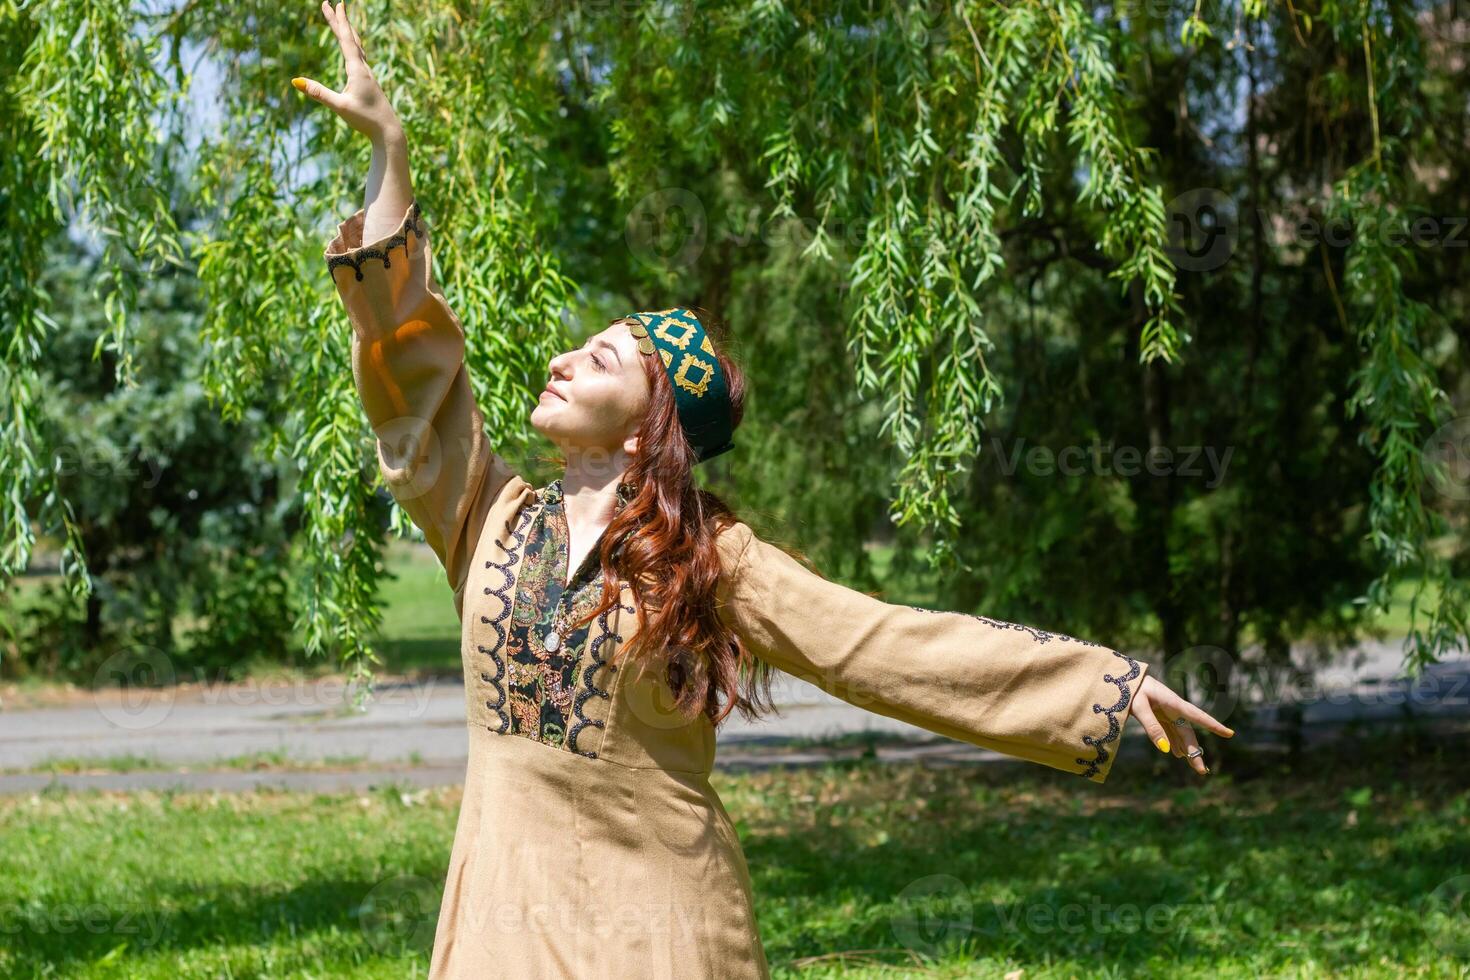 Armenian young woman in traditional clothes in the nature in summer photo